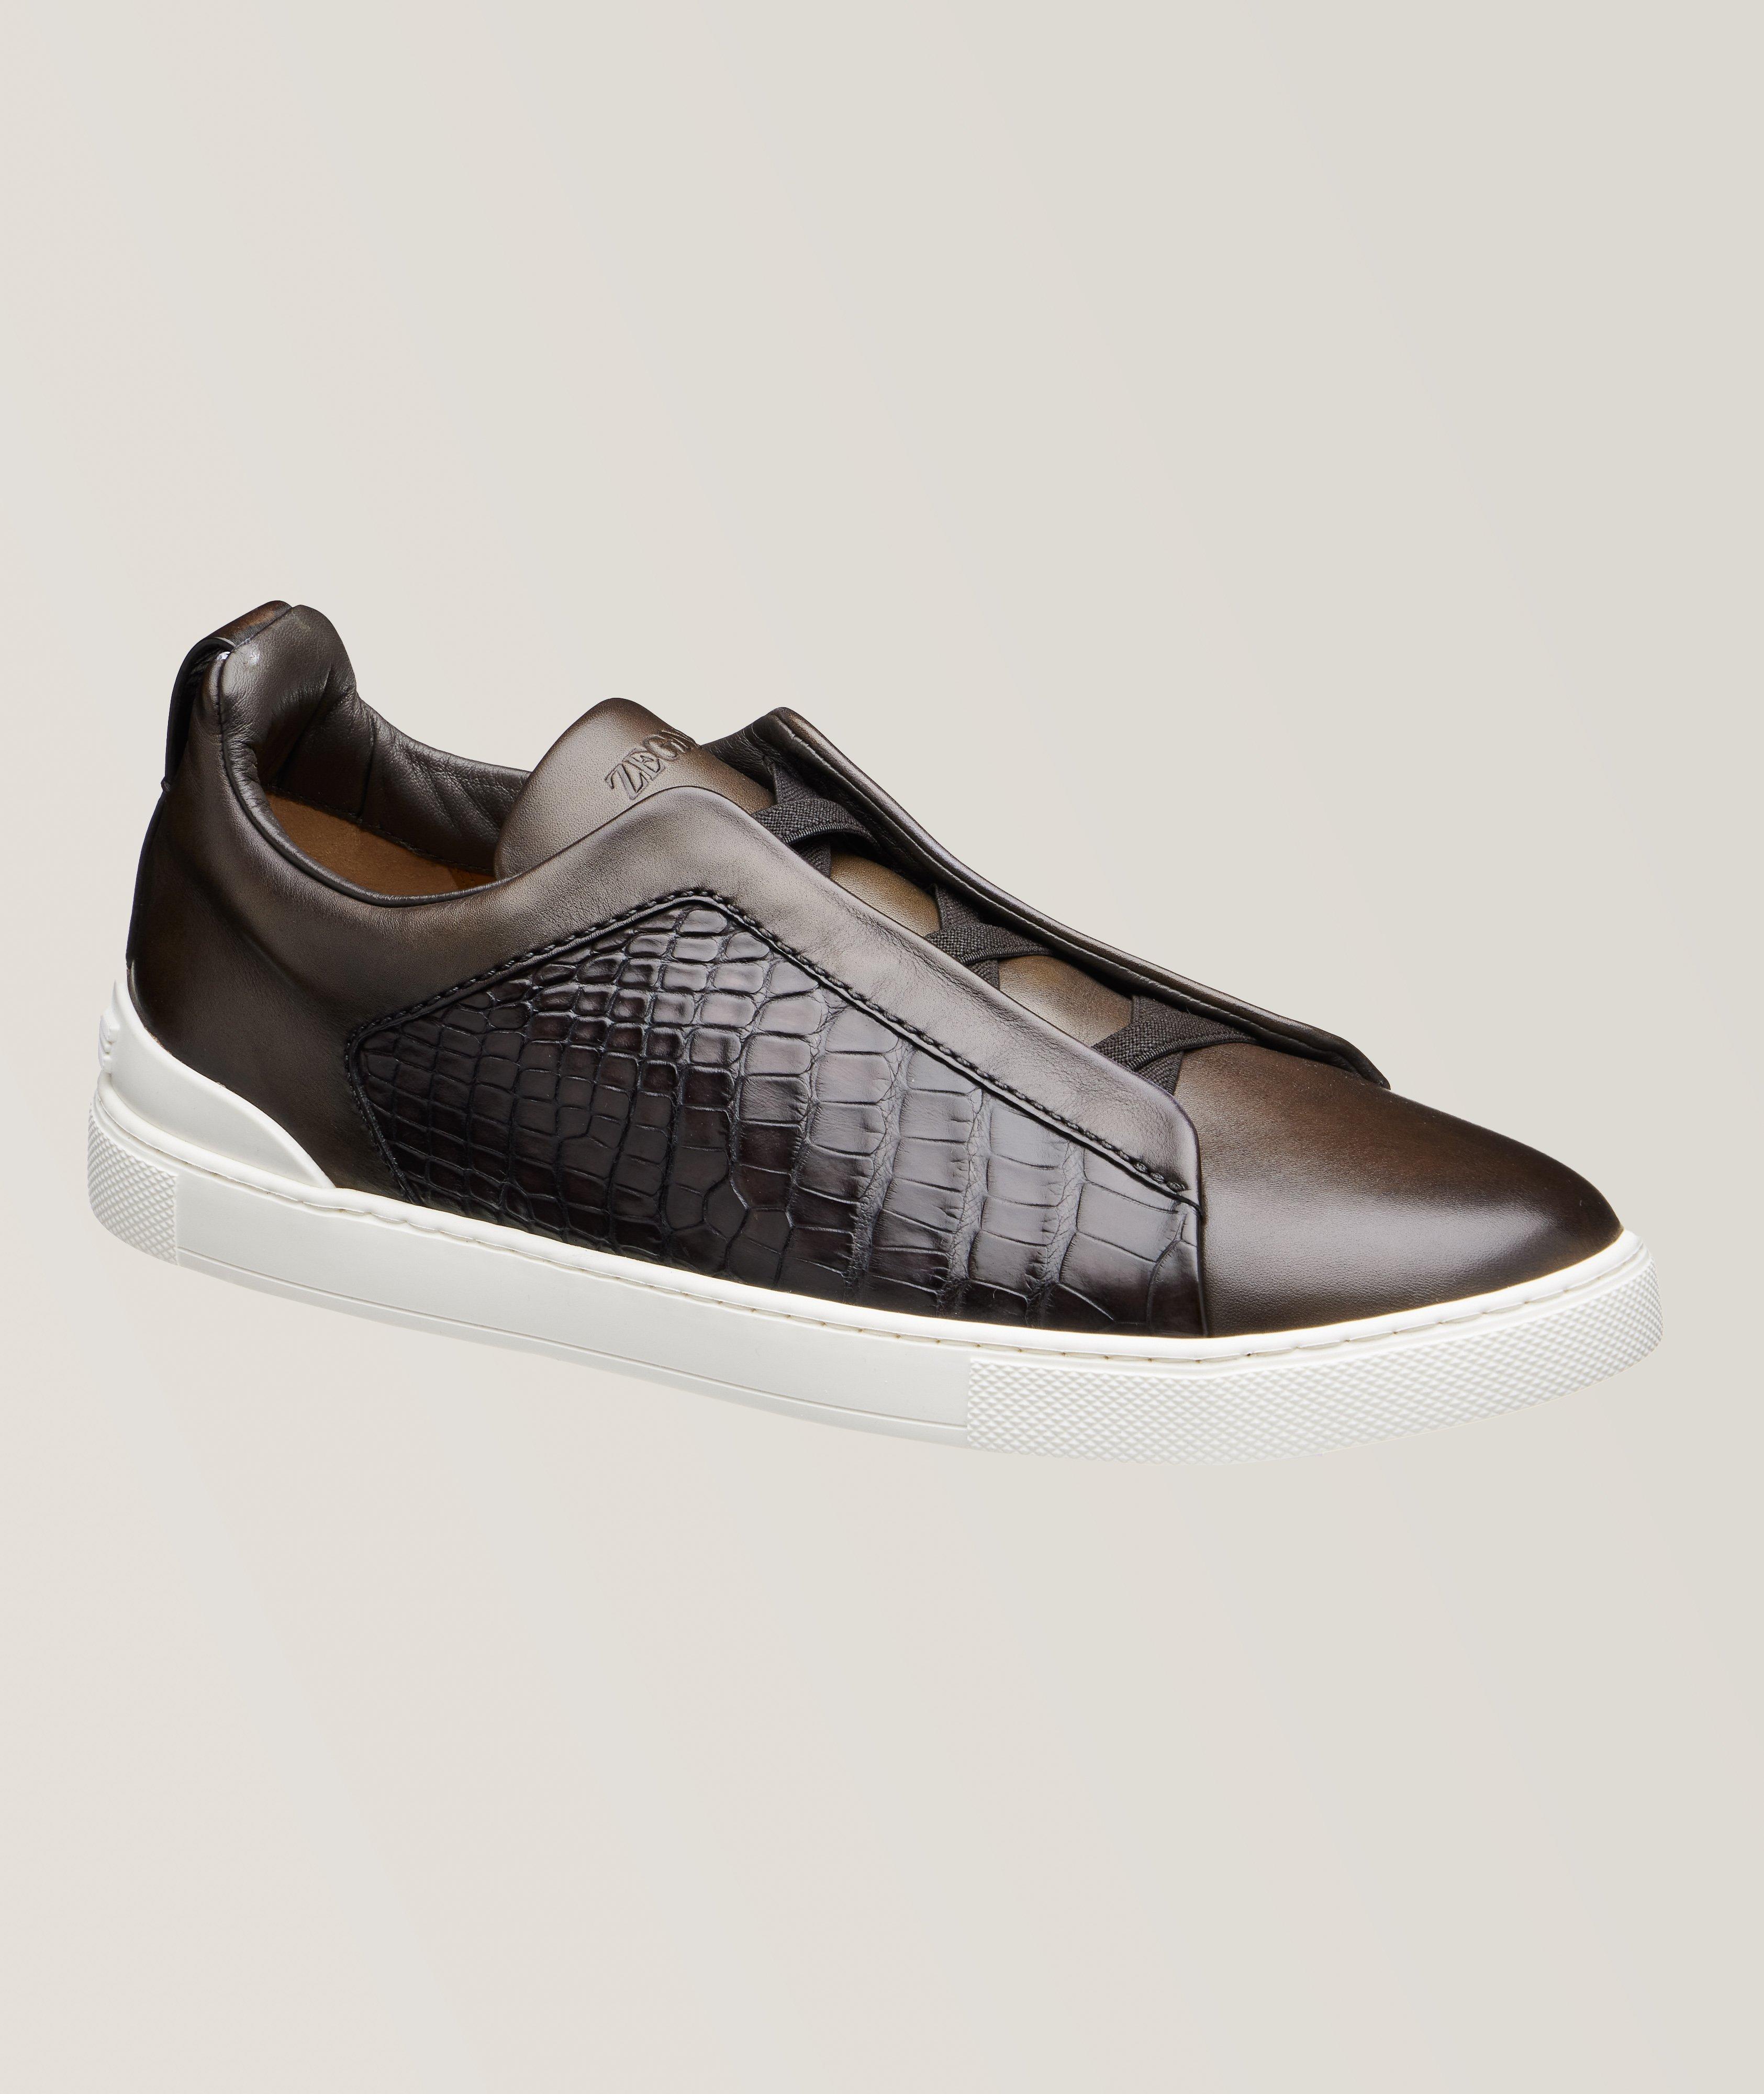 Triple Stitch Leather & Alligator Embossed Sneakers image 0